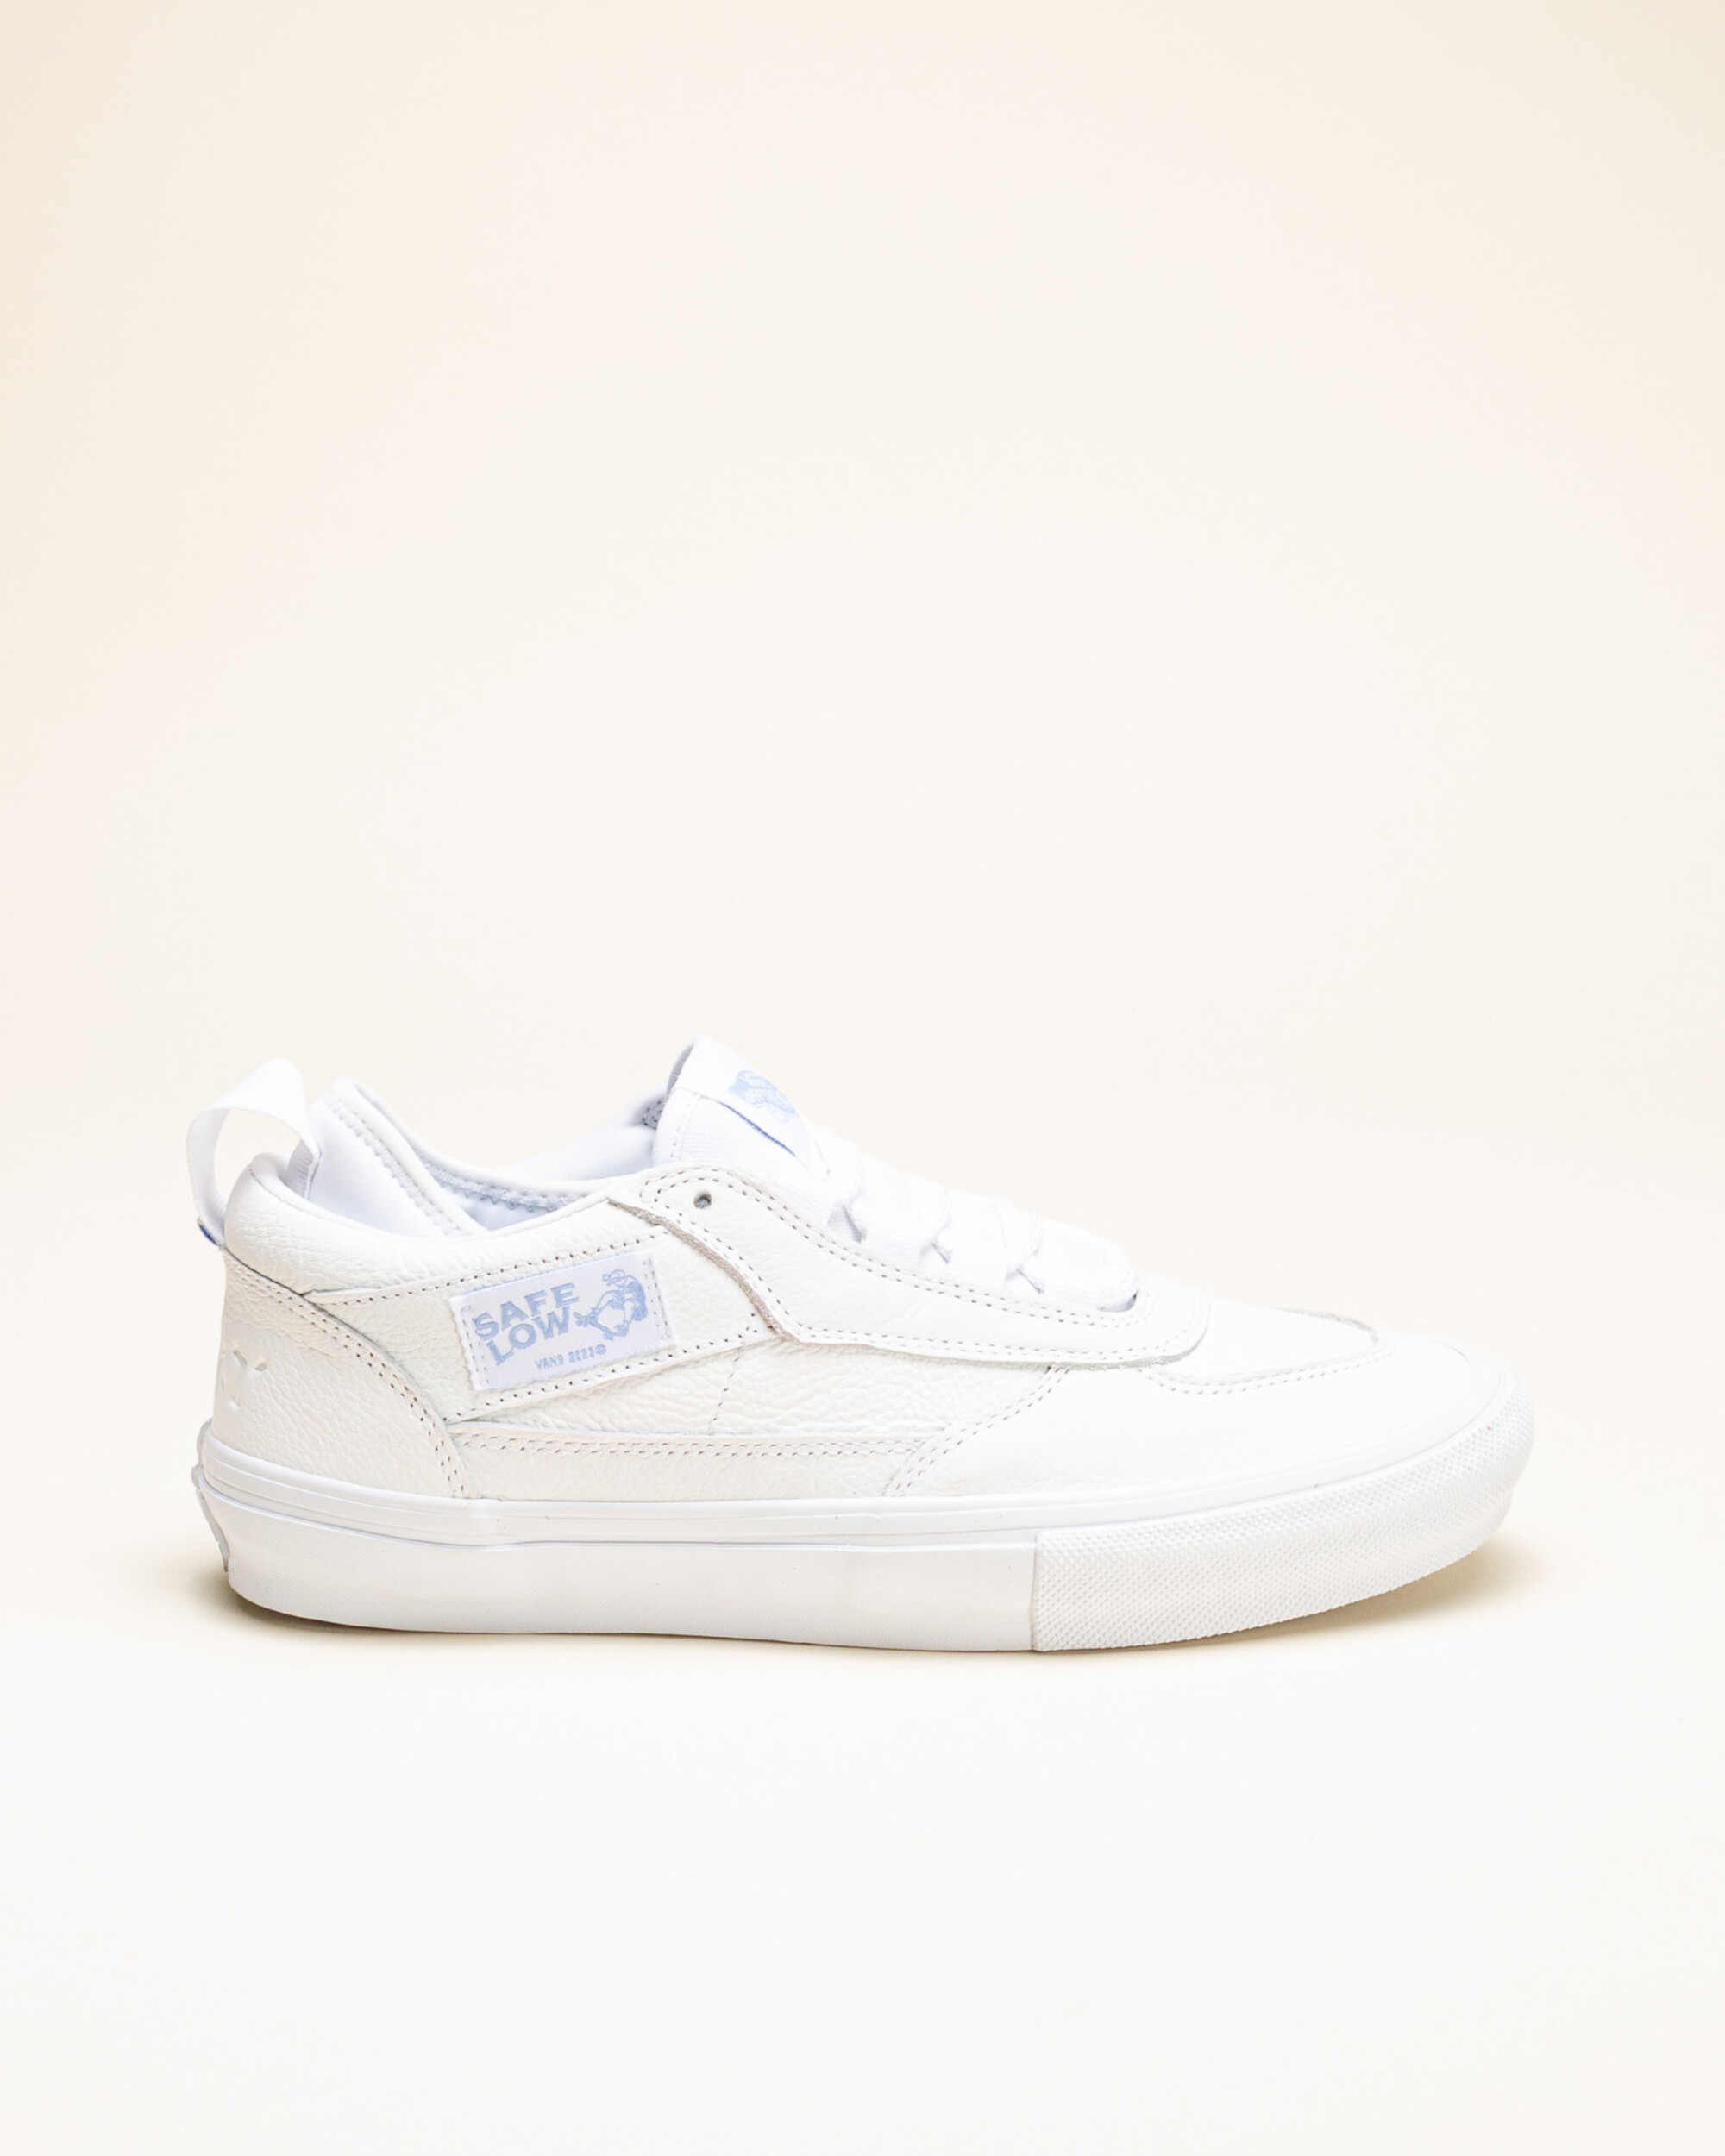 Vans x Palace Safe Low - White Leather